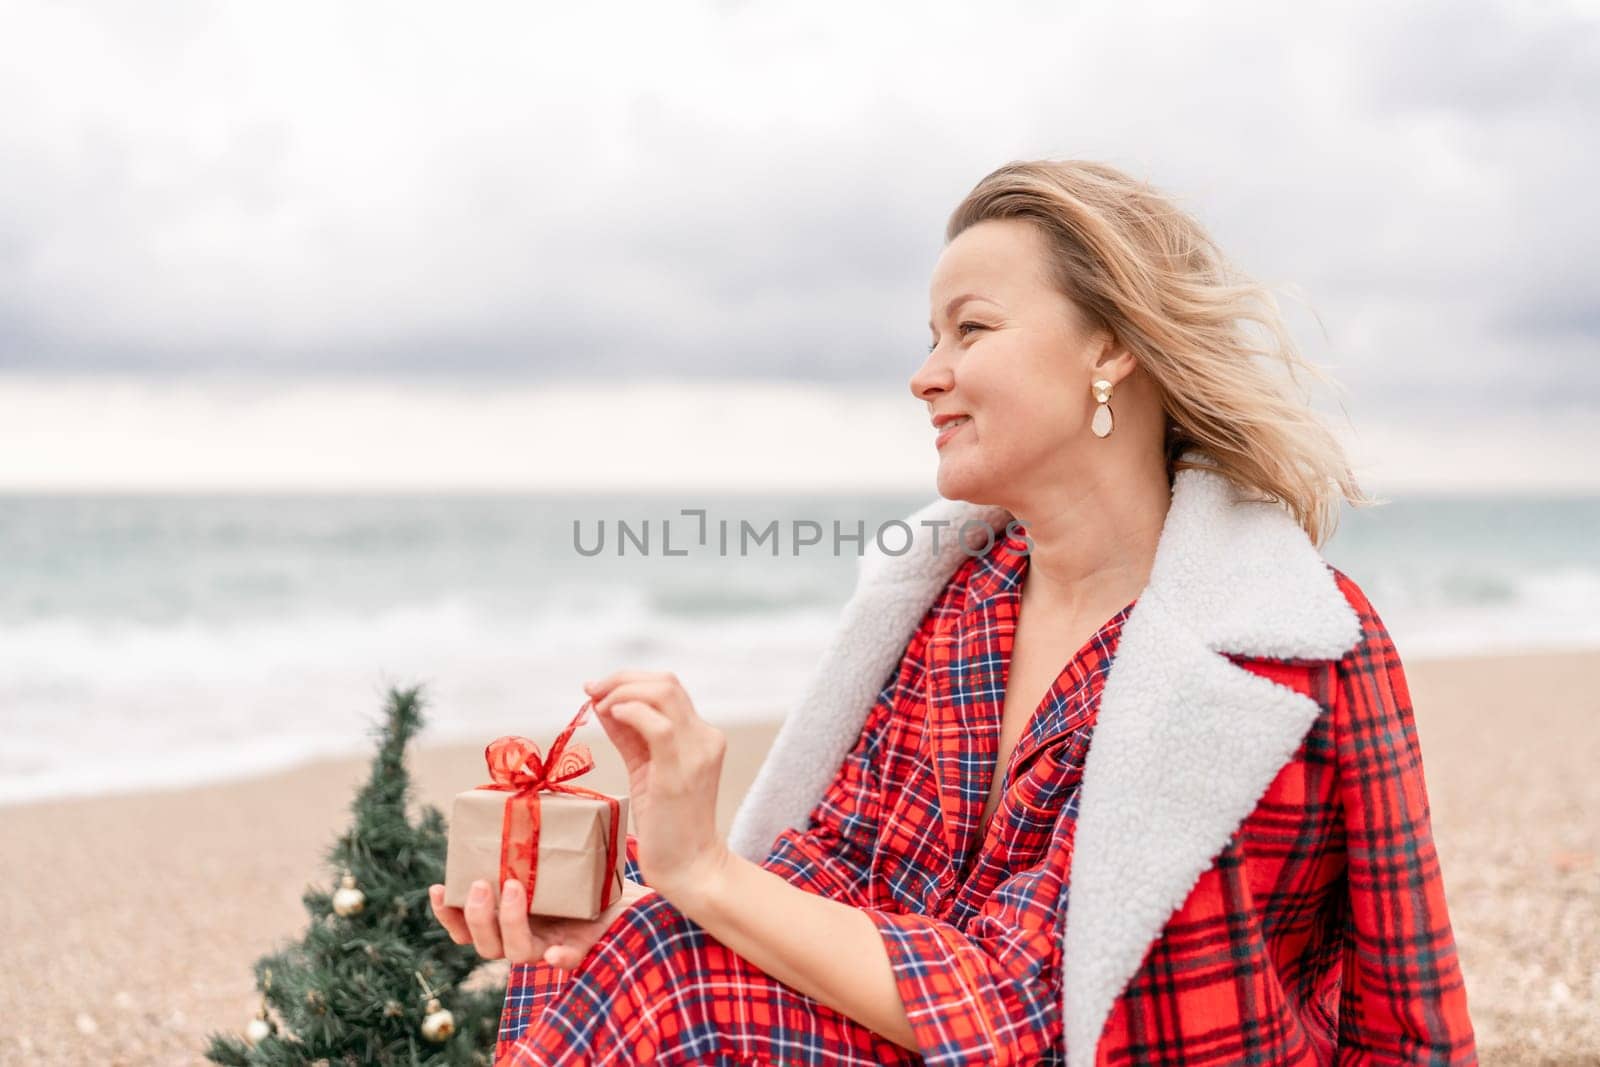 Lady in plaid shirt holding a gift in his hands enjoys beach with Christmas tree. Coastal area. Christmas, New Year holidays concep by Matiunina